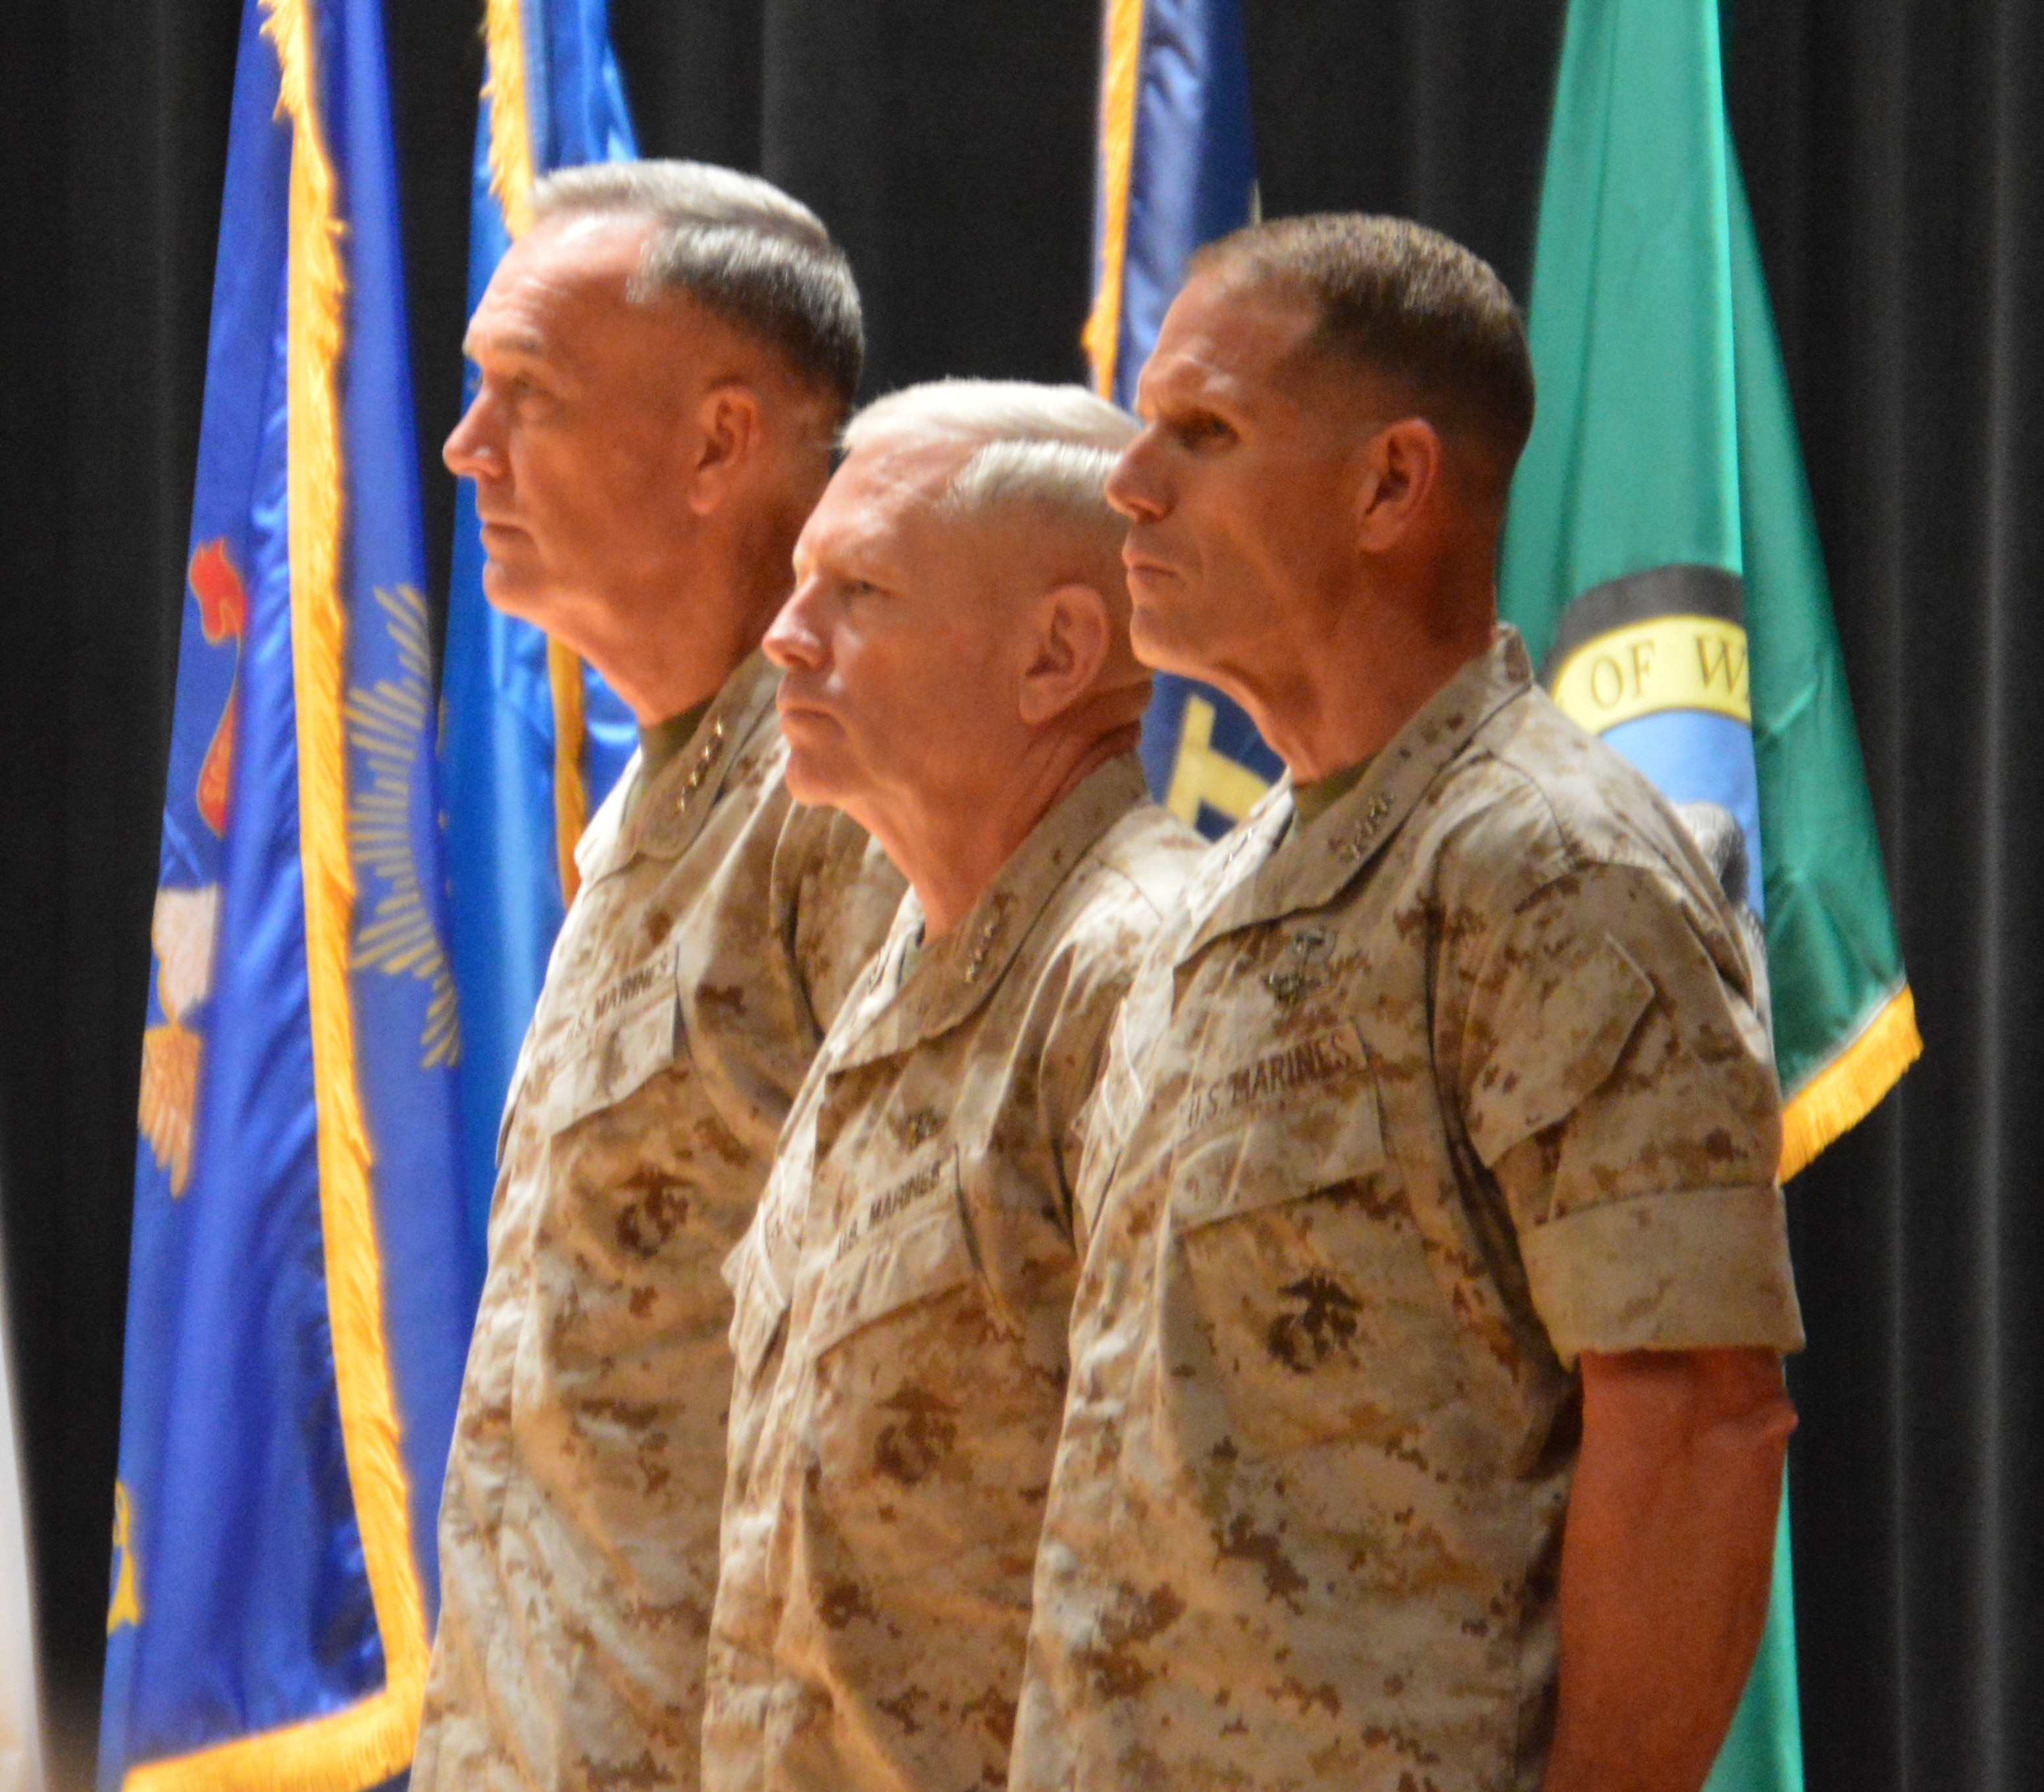 Lt. Gen. Robert Walsh (right) takes command of the Marine Corps Combat Development Command from retiring Lt. Gen. Kenneth Glueck (center) in an Aug. 20 ceremony at Marine Corps Base Quantico, Va. USNI News photo.